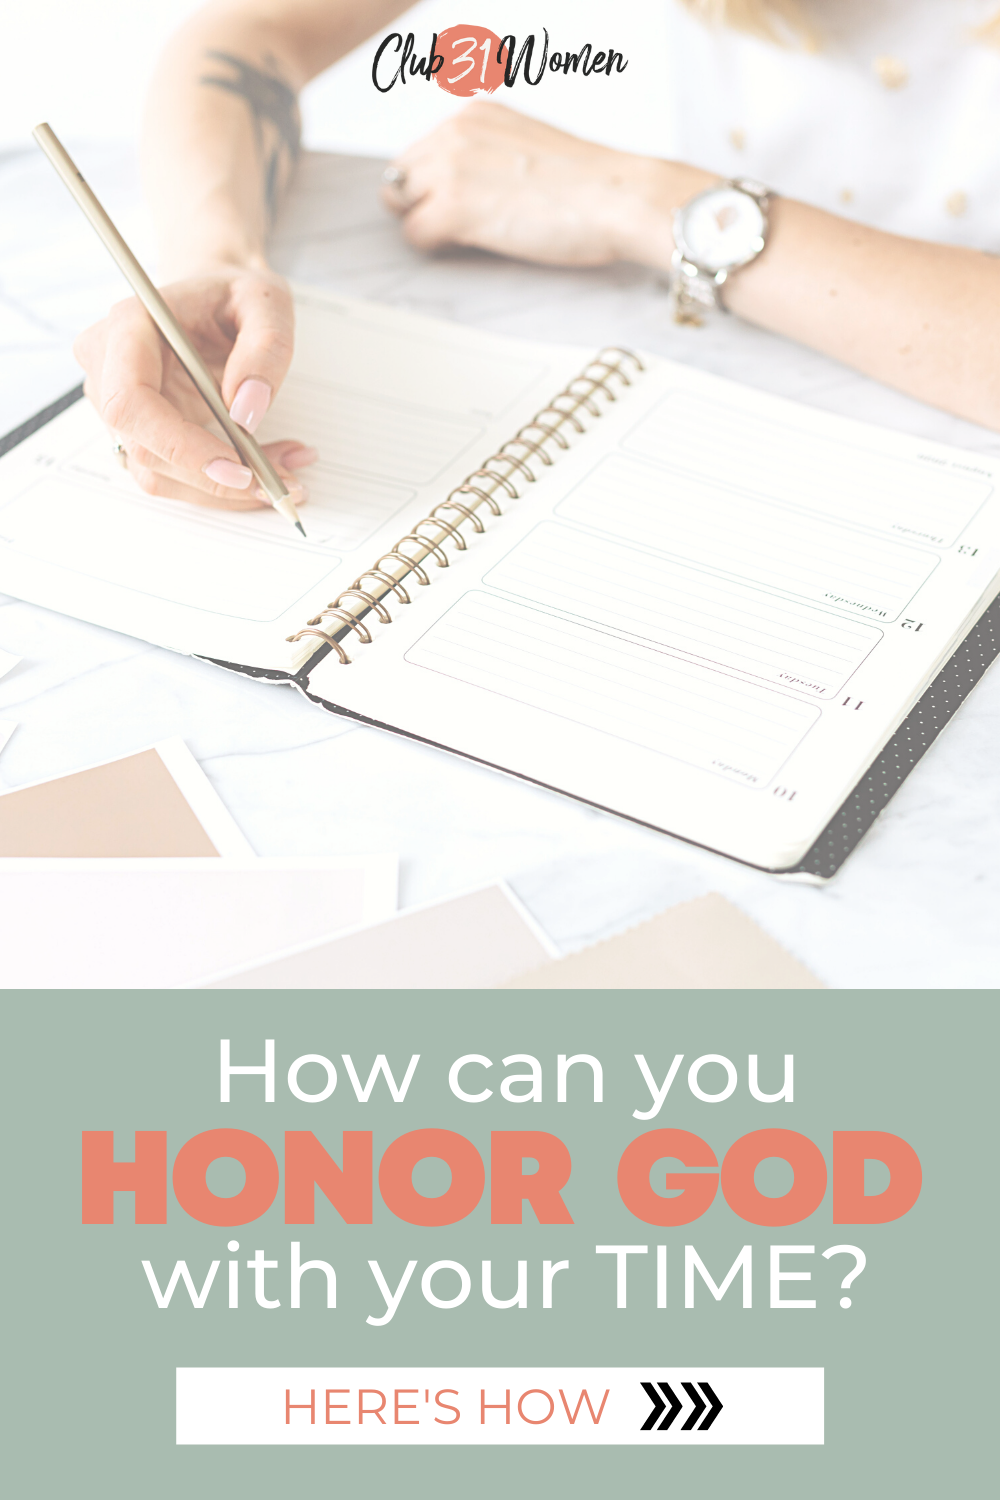 There never seems to be enough time. Perhaps we need to take our lists and priorities to the Lord so He can help us define what's best. via @Club31Women